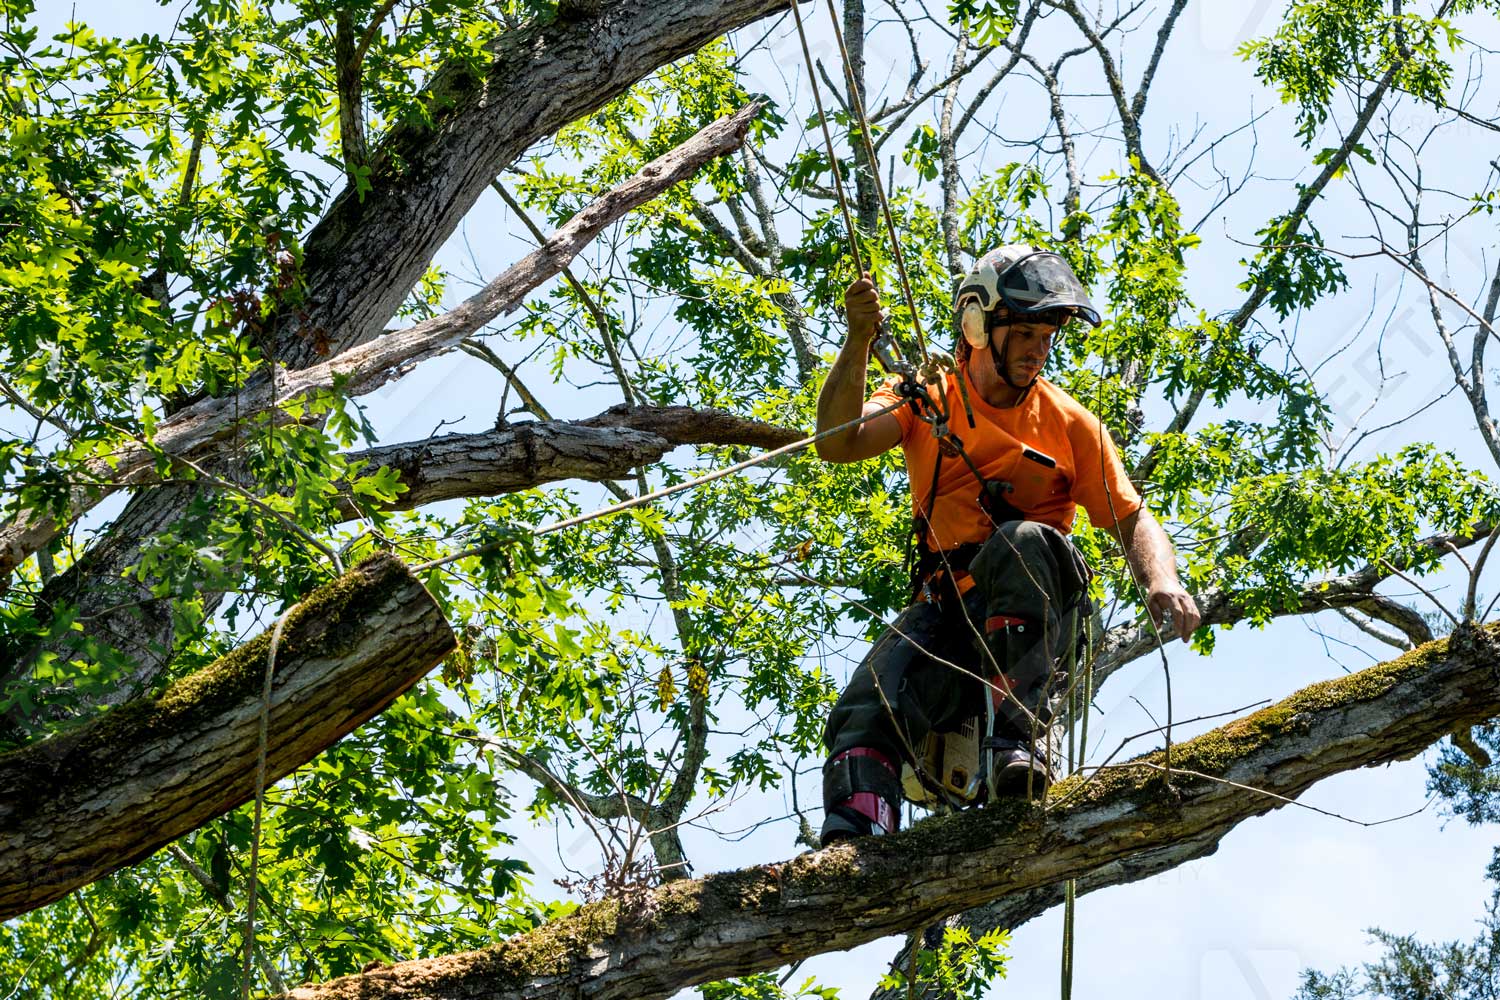 Arborist With A Mesh Face Shield Working At Height